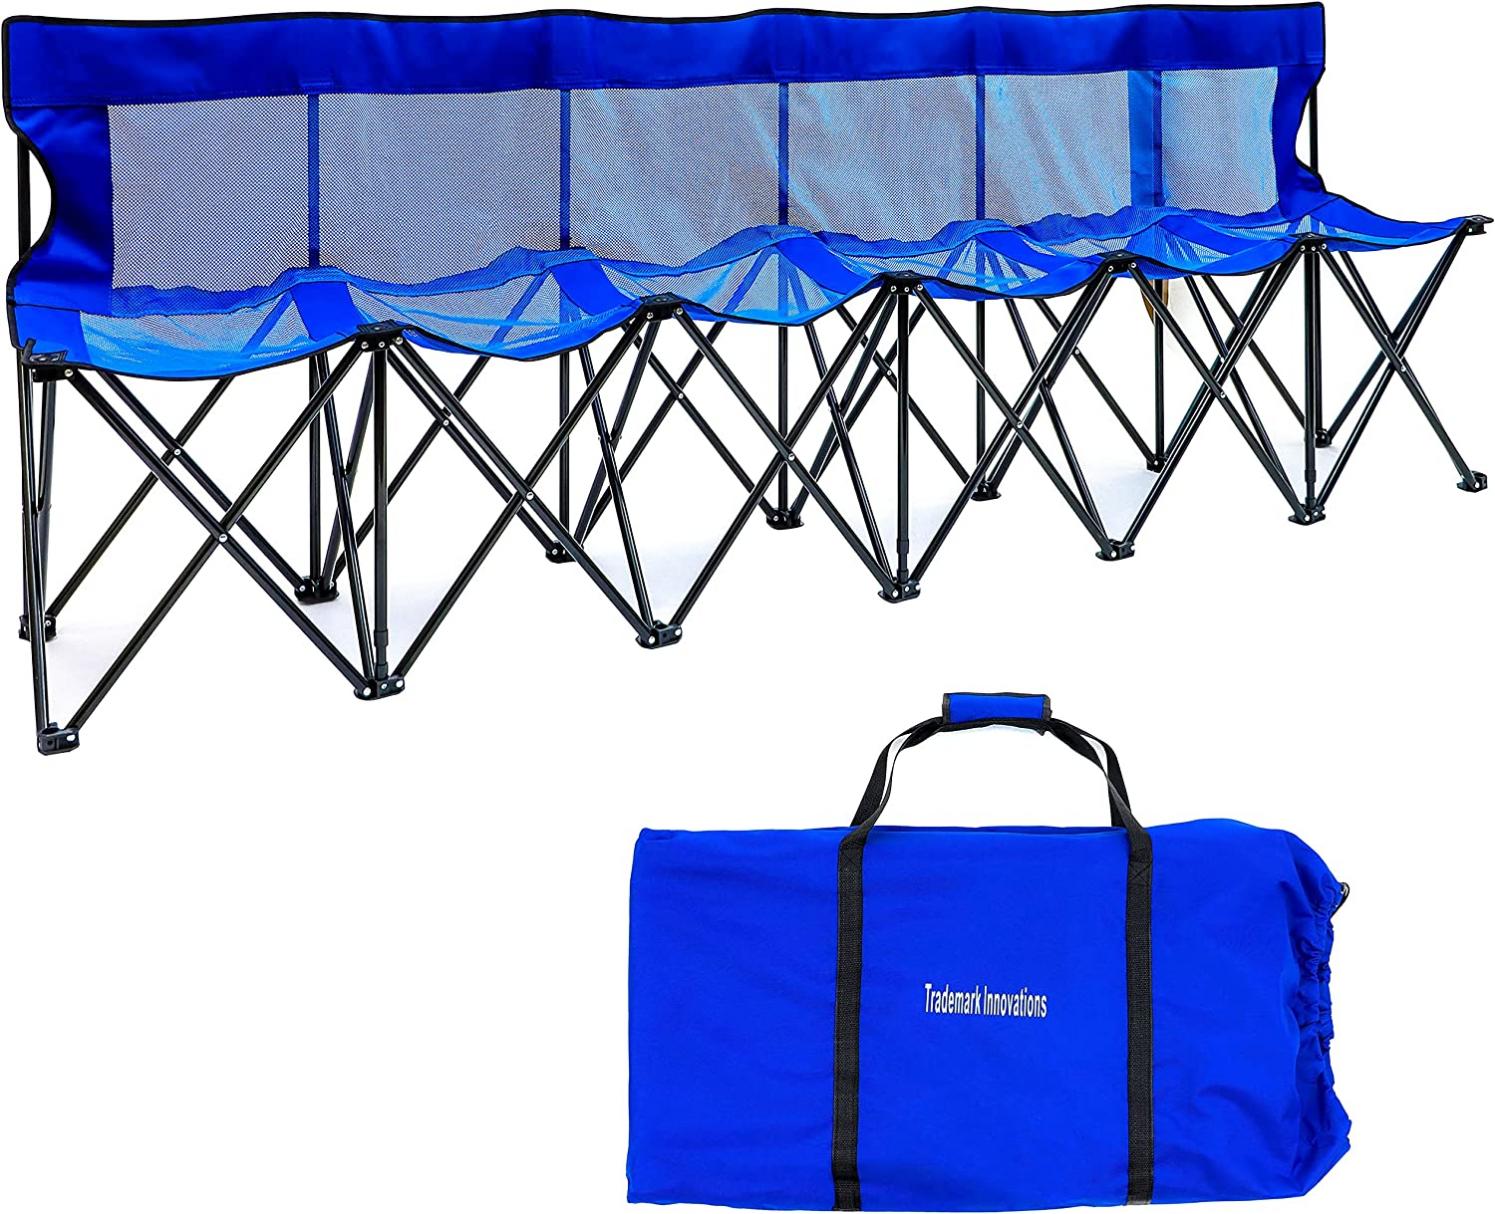 Portable Sports Bench with Mesh Seat and Back - by Trademark Innovations